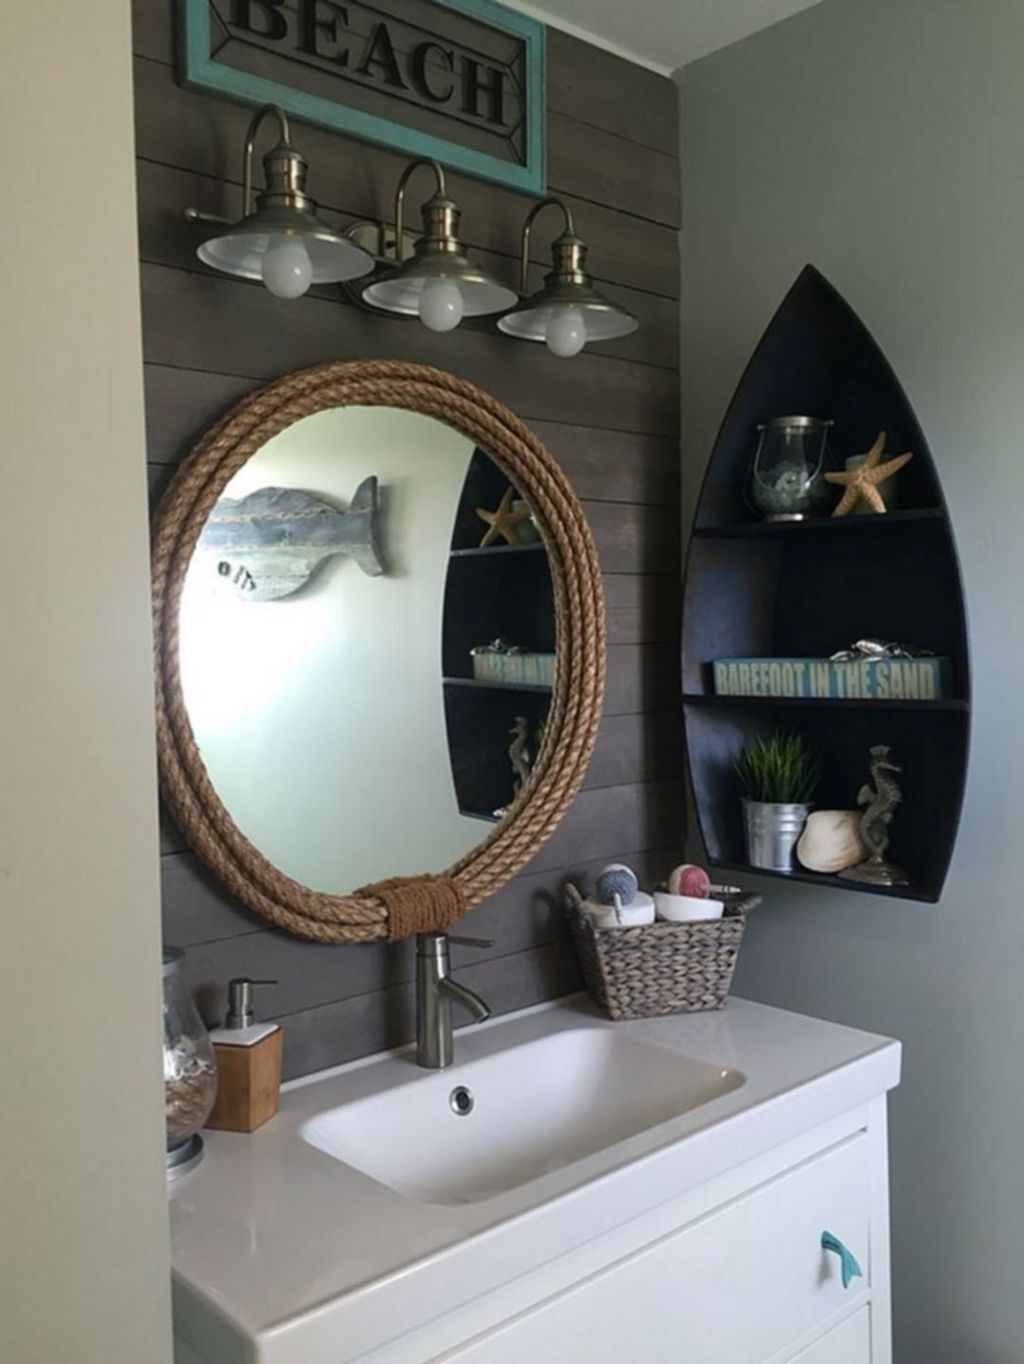 Things to know about the nautical
bathroom decor